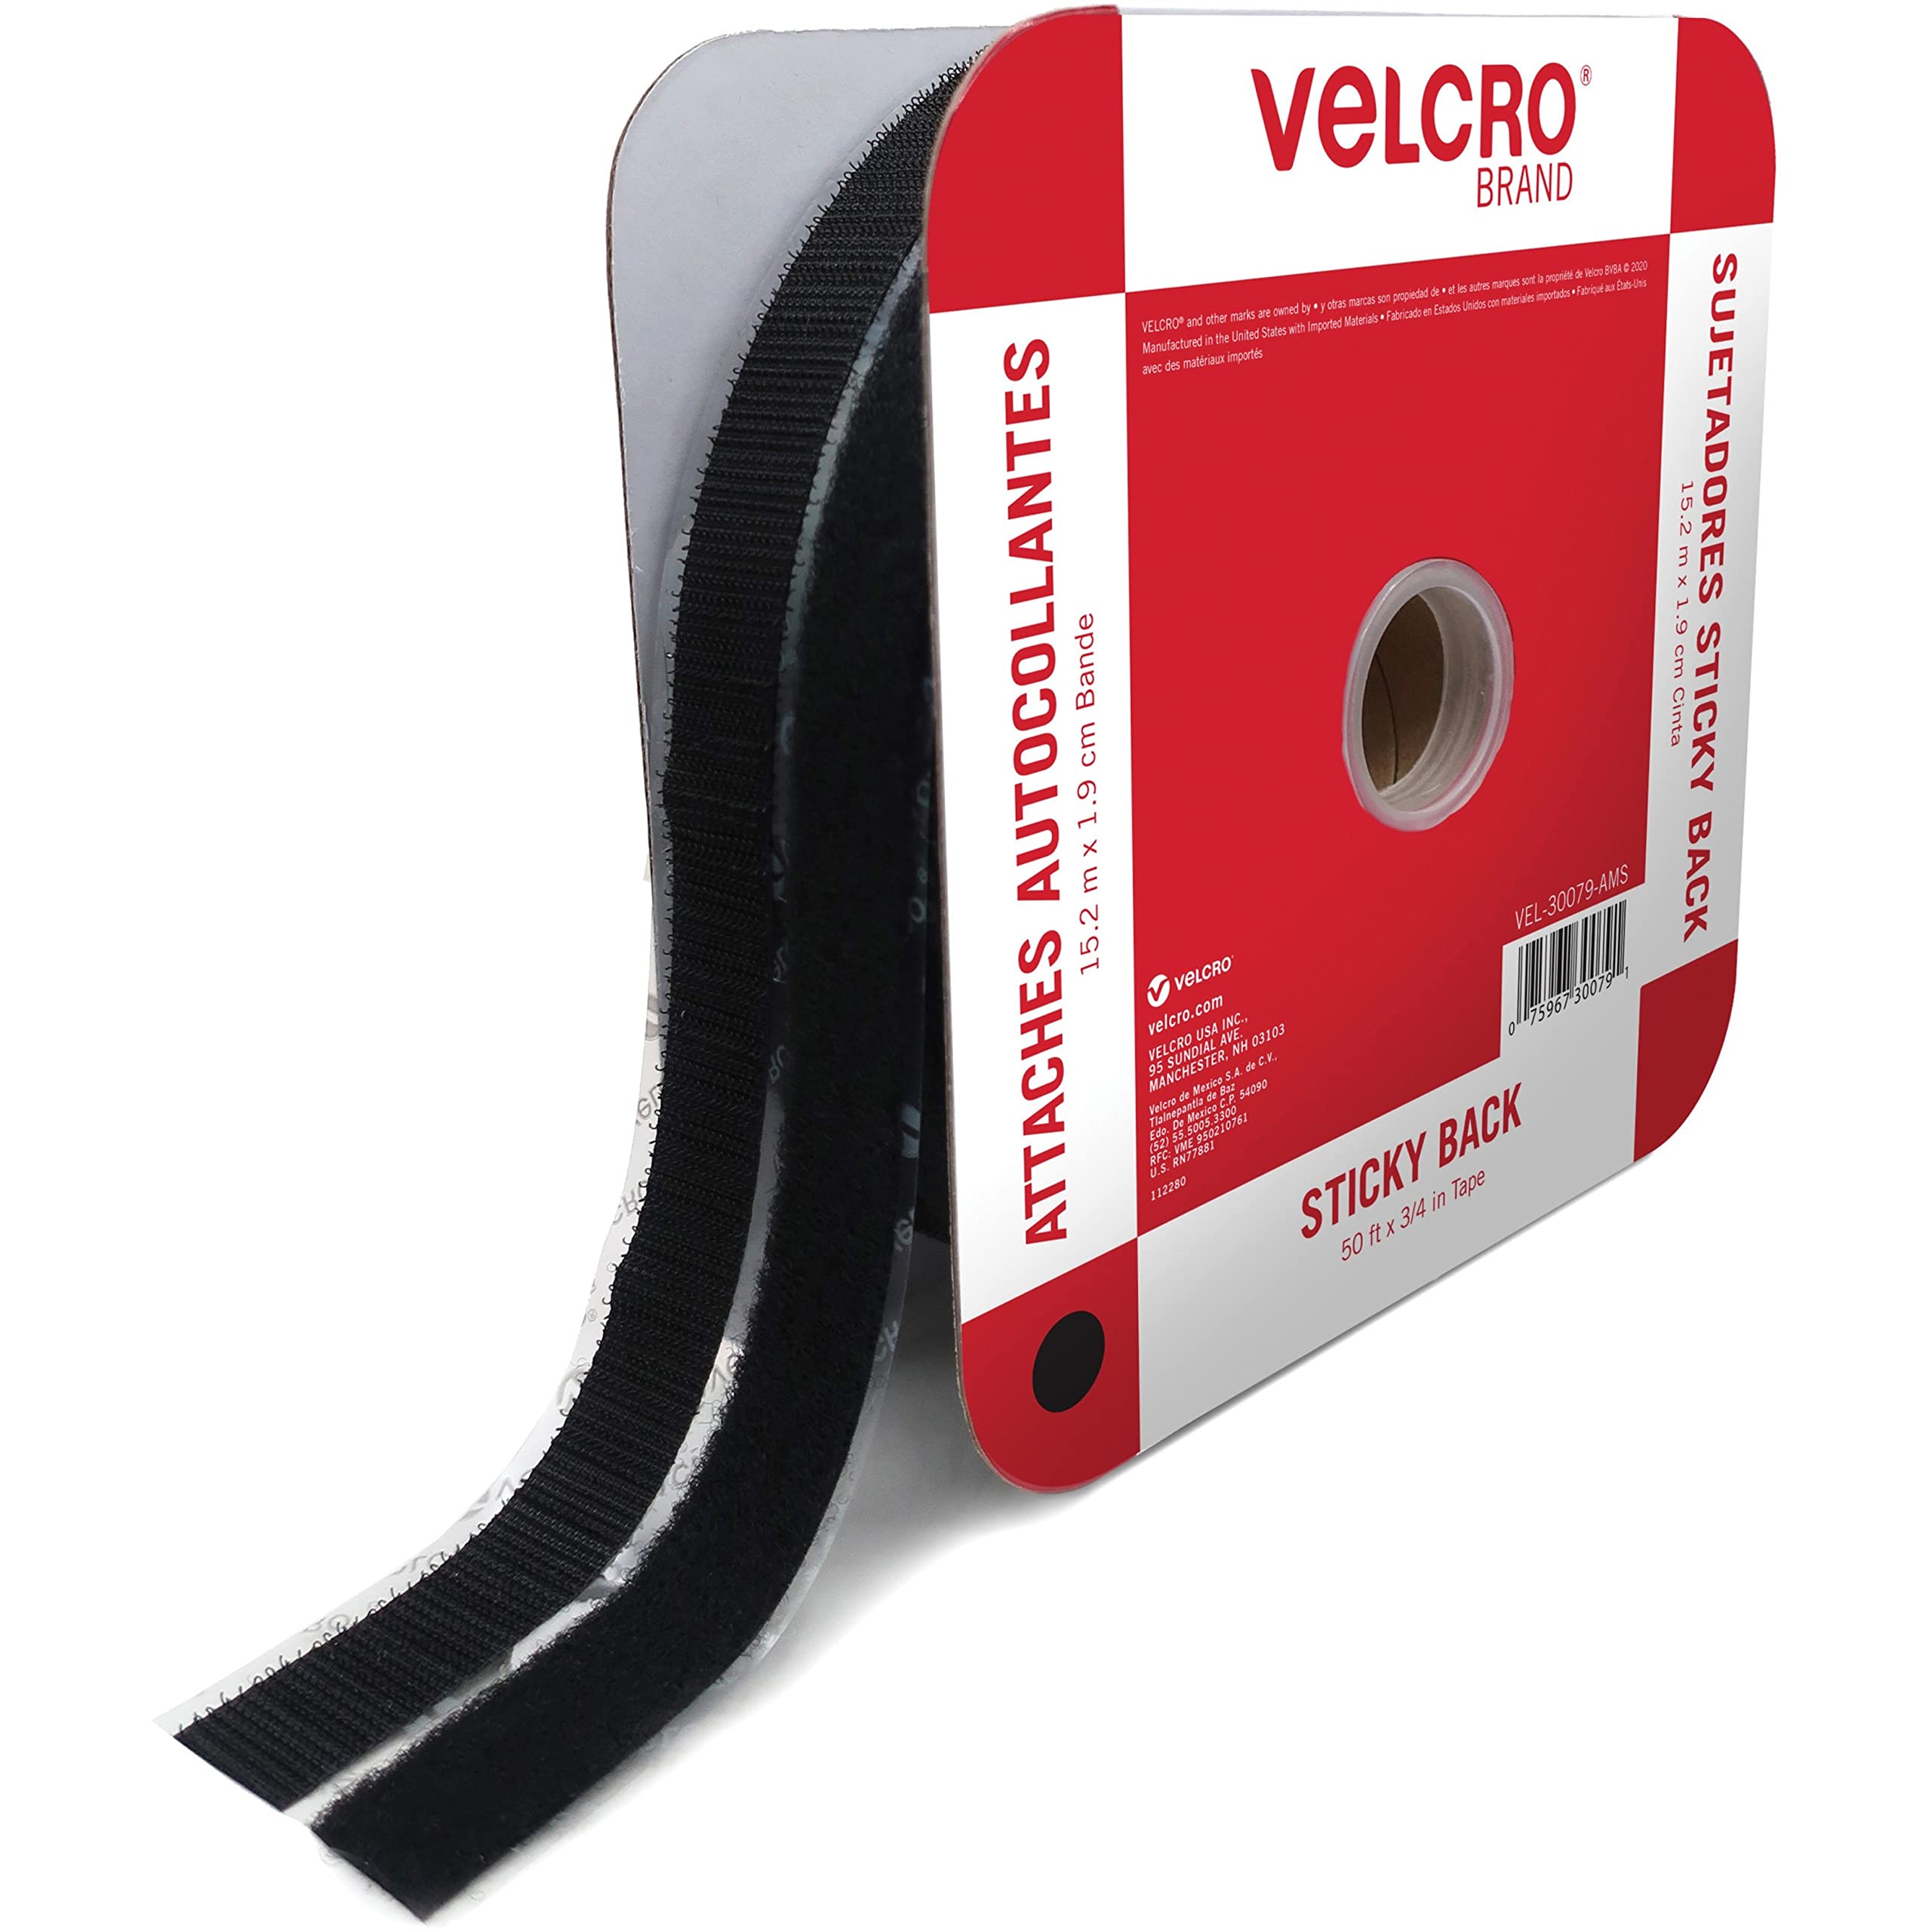 VELCRO Brand - Sticky Back Tape Bulk Roll, 50 ft x 3/4 in, Black, Cut  Hook and Loop Adhesive Strips to Length